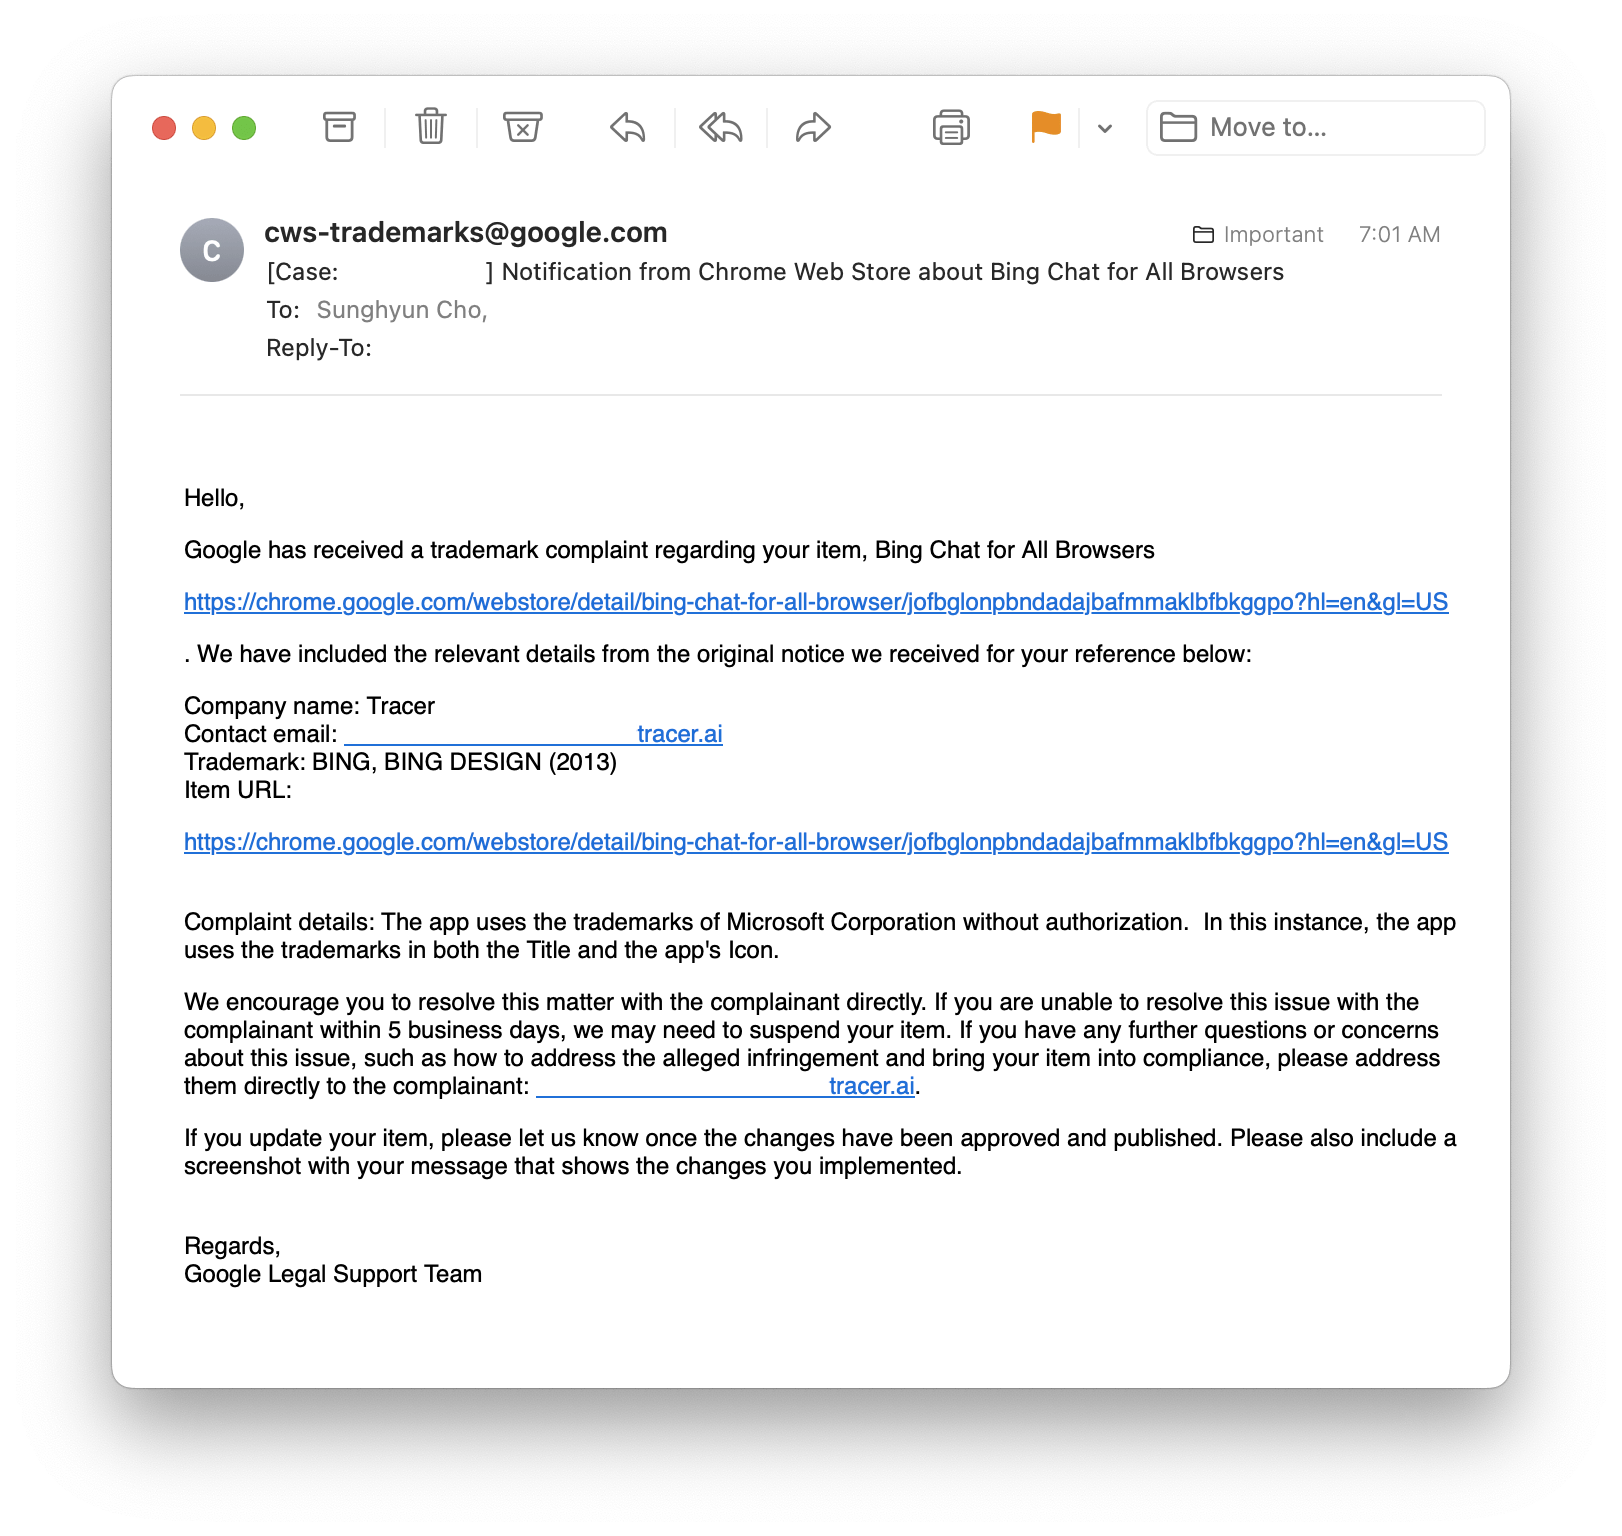 Letter from Microsoft Legal